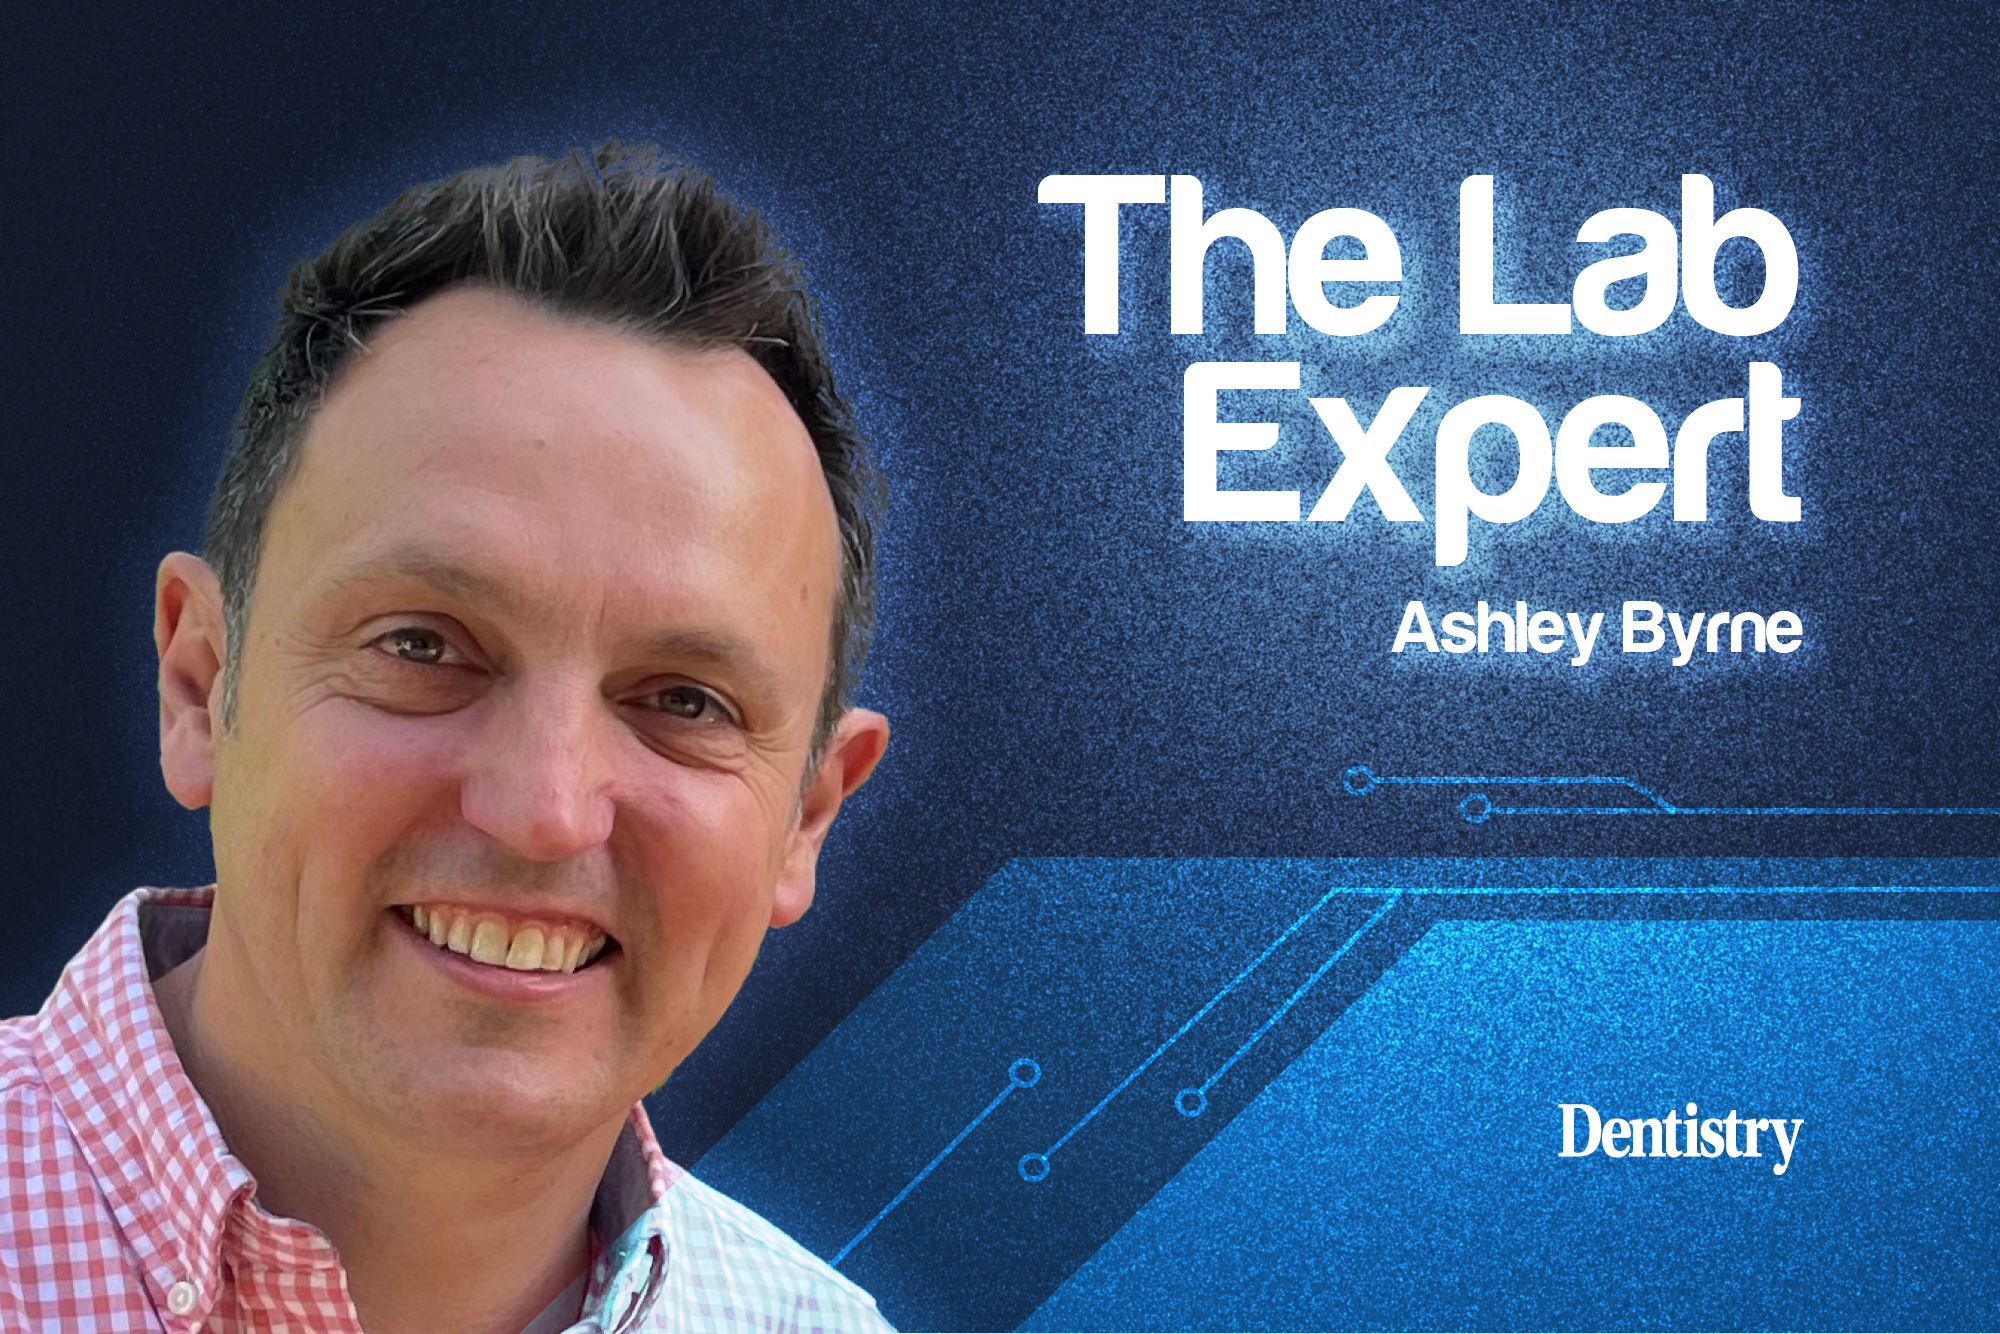 'Opening new career paths in our industry is vital': This month, Ashley Byrne discusses the importance of investing in education and professional development in a dental lab.